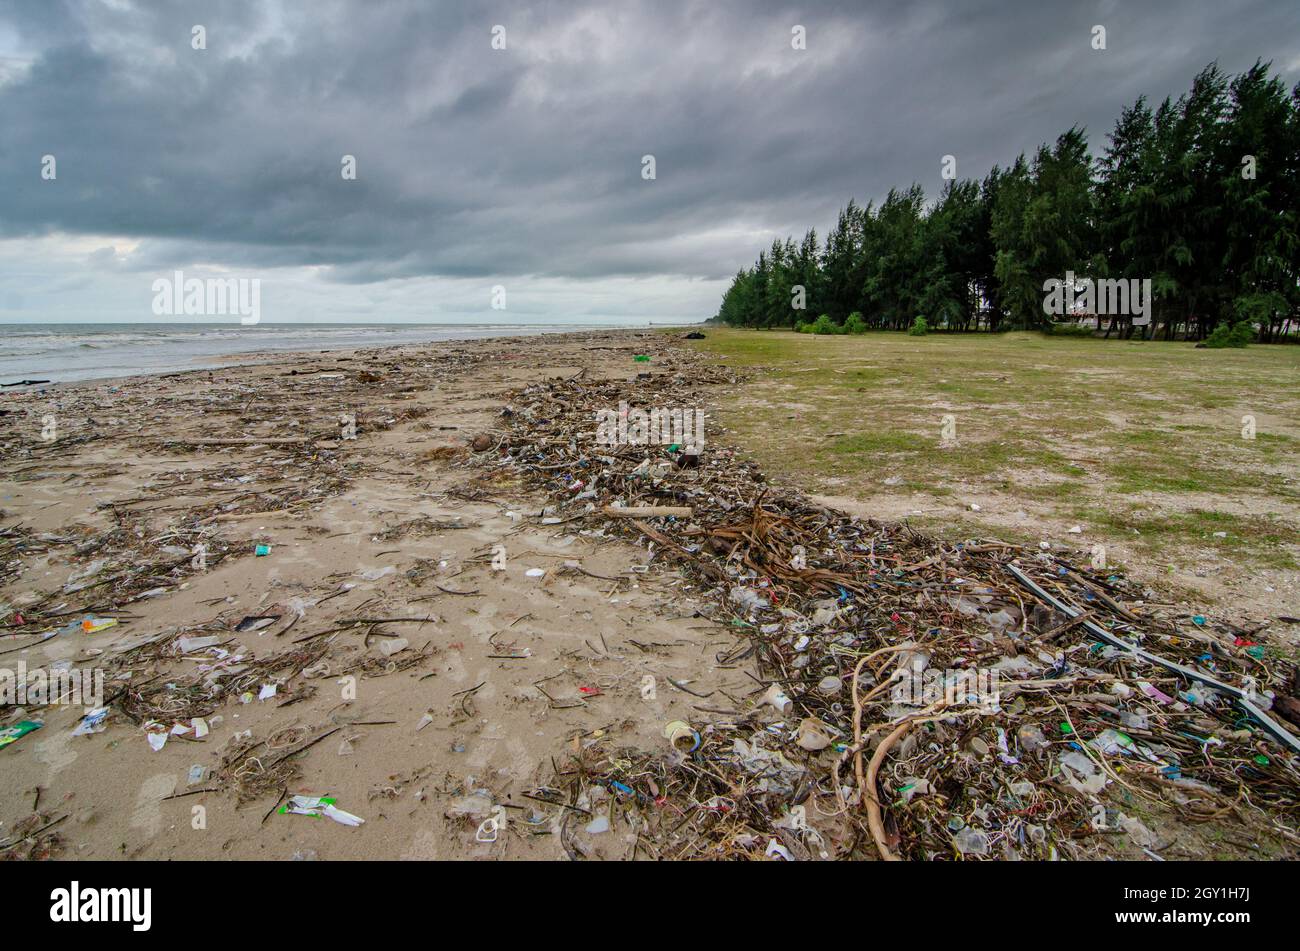 Plastic waste that fills the beach Stock Photo